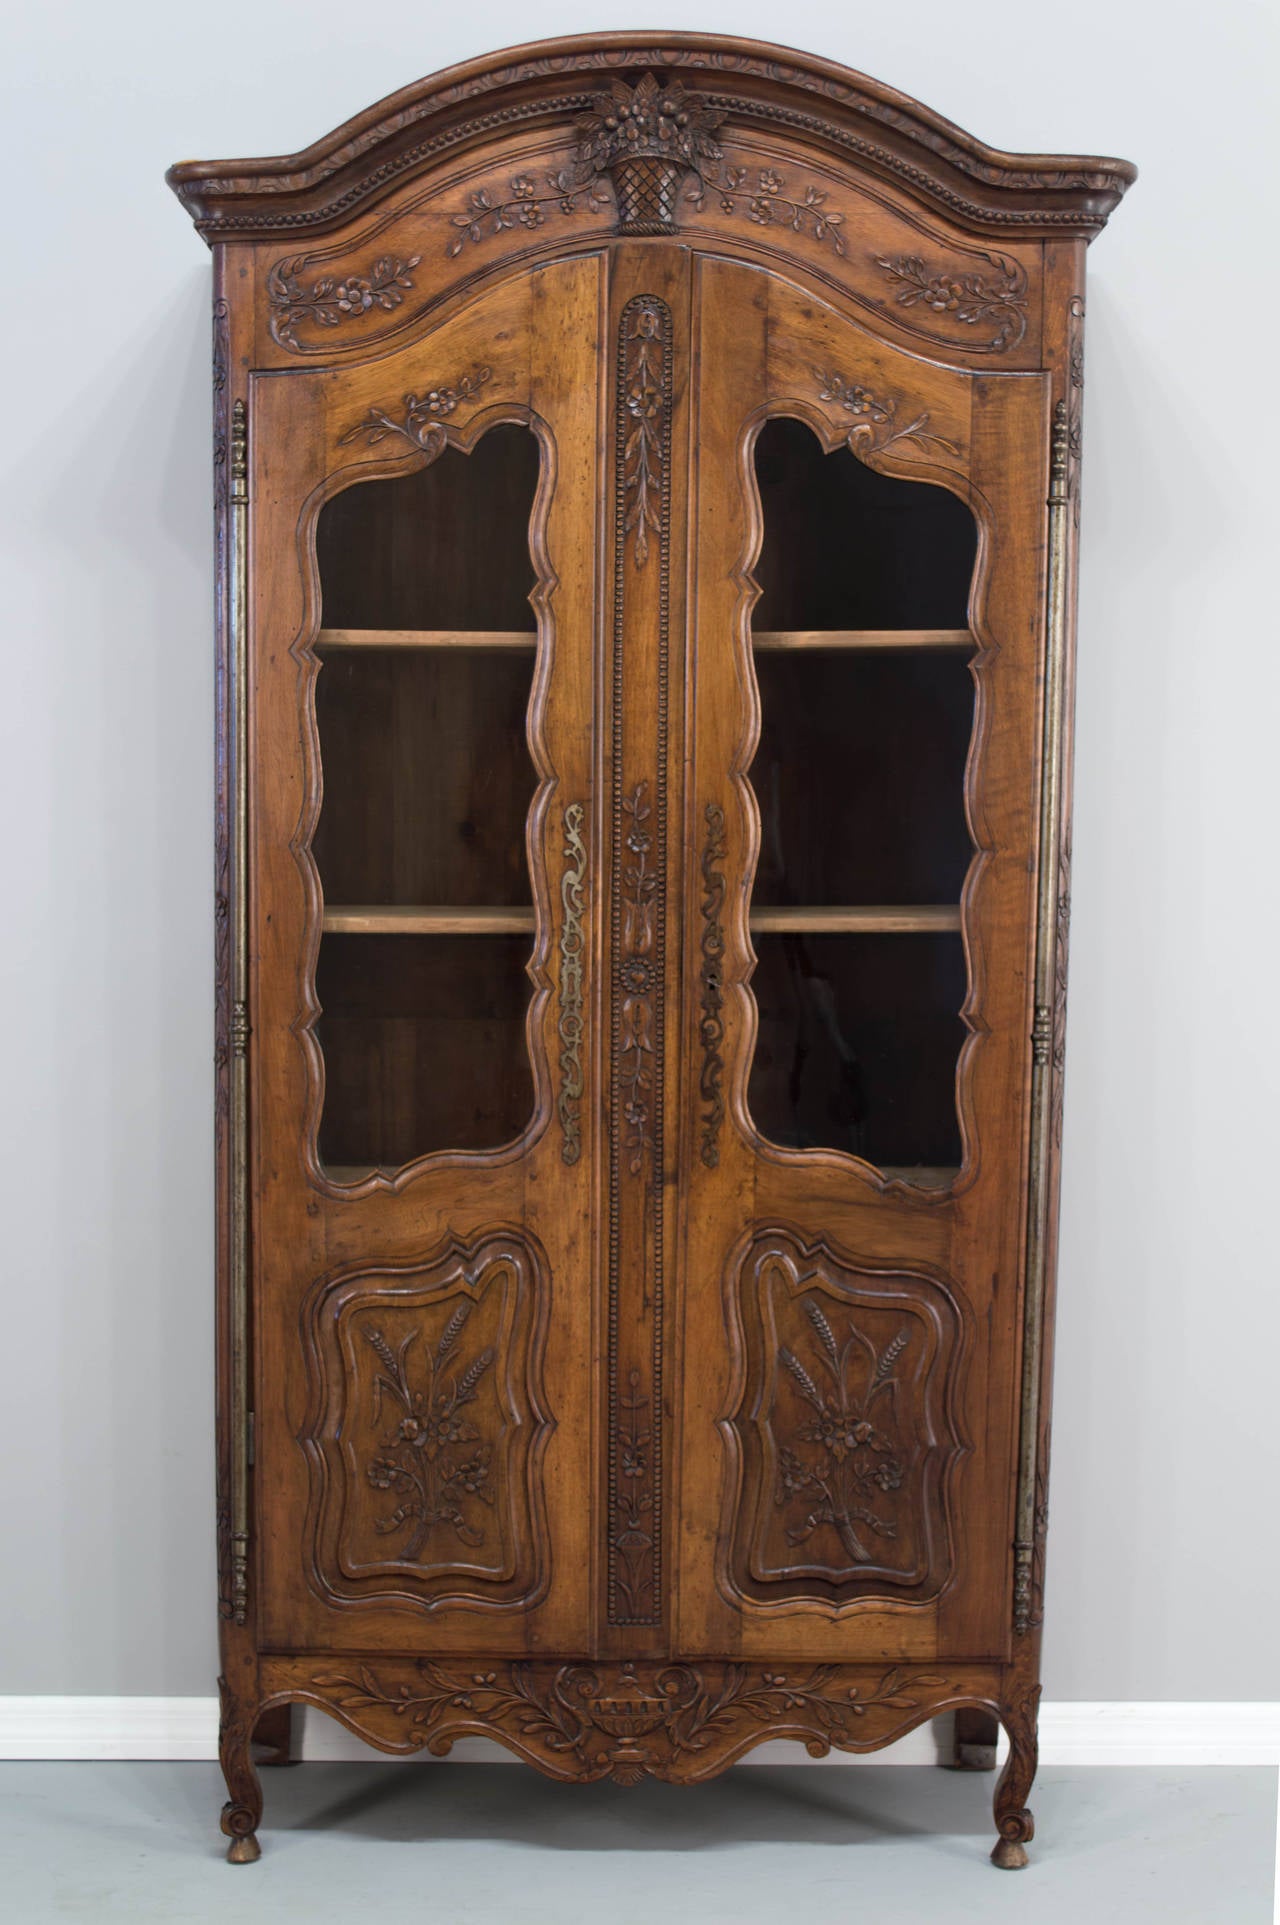 This vitrine was made in the first part of the 20th century by an artisan as it is all pegged construction and hand-carved, a beautiful walnut from Provence, a Chapeau de Gendarme crown, adjustable shelves, original glass doors re-glazed. A great